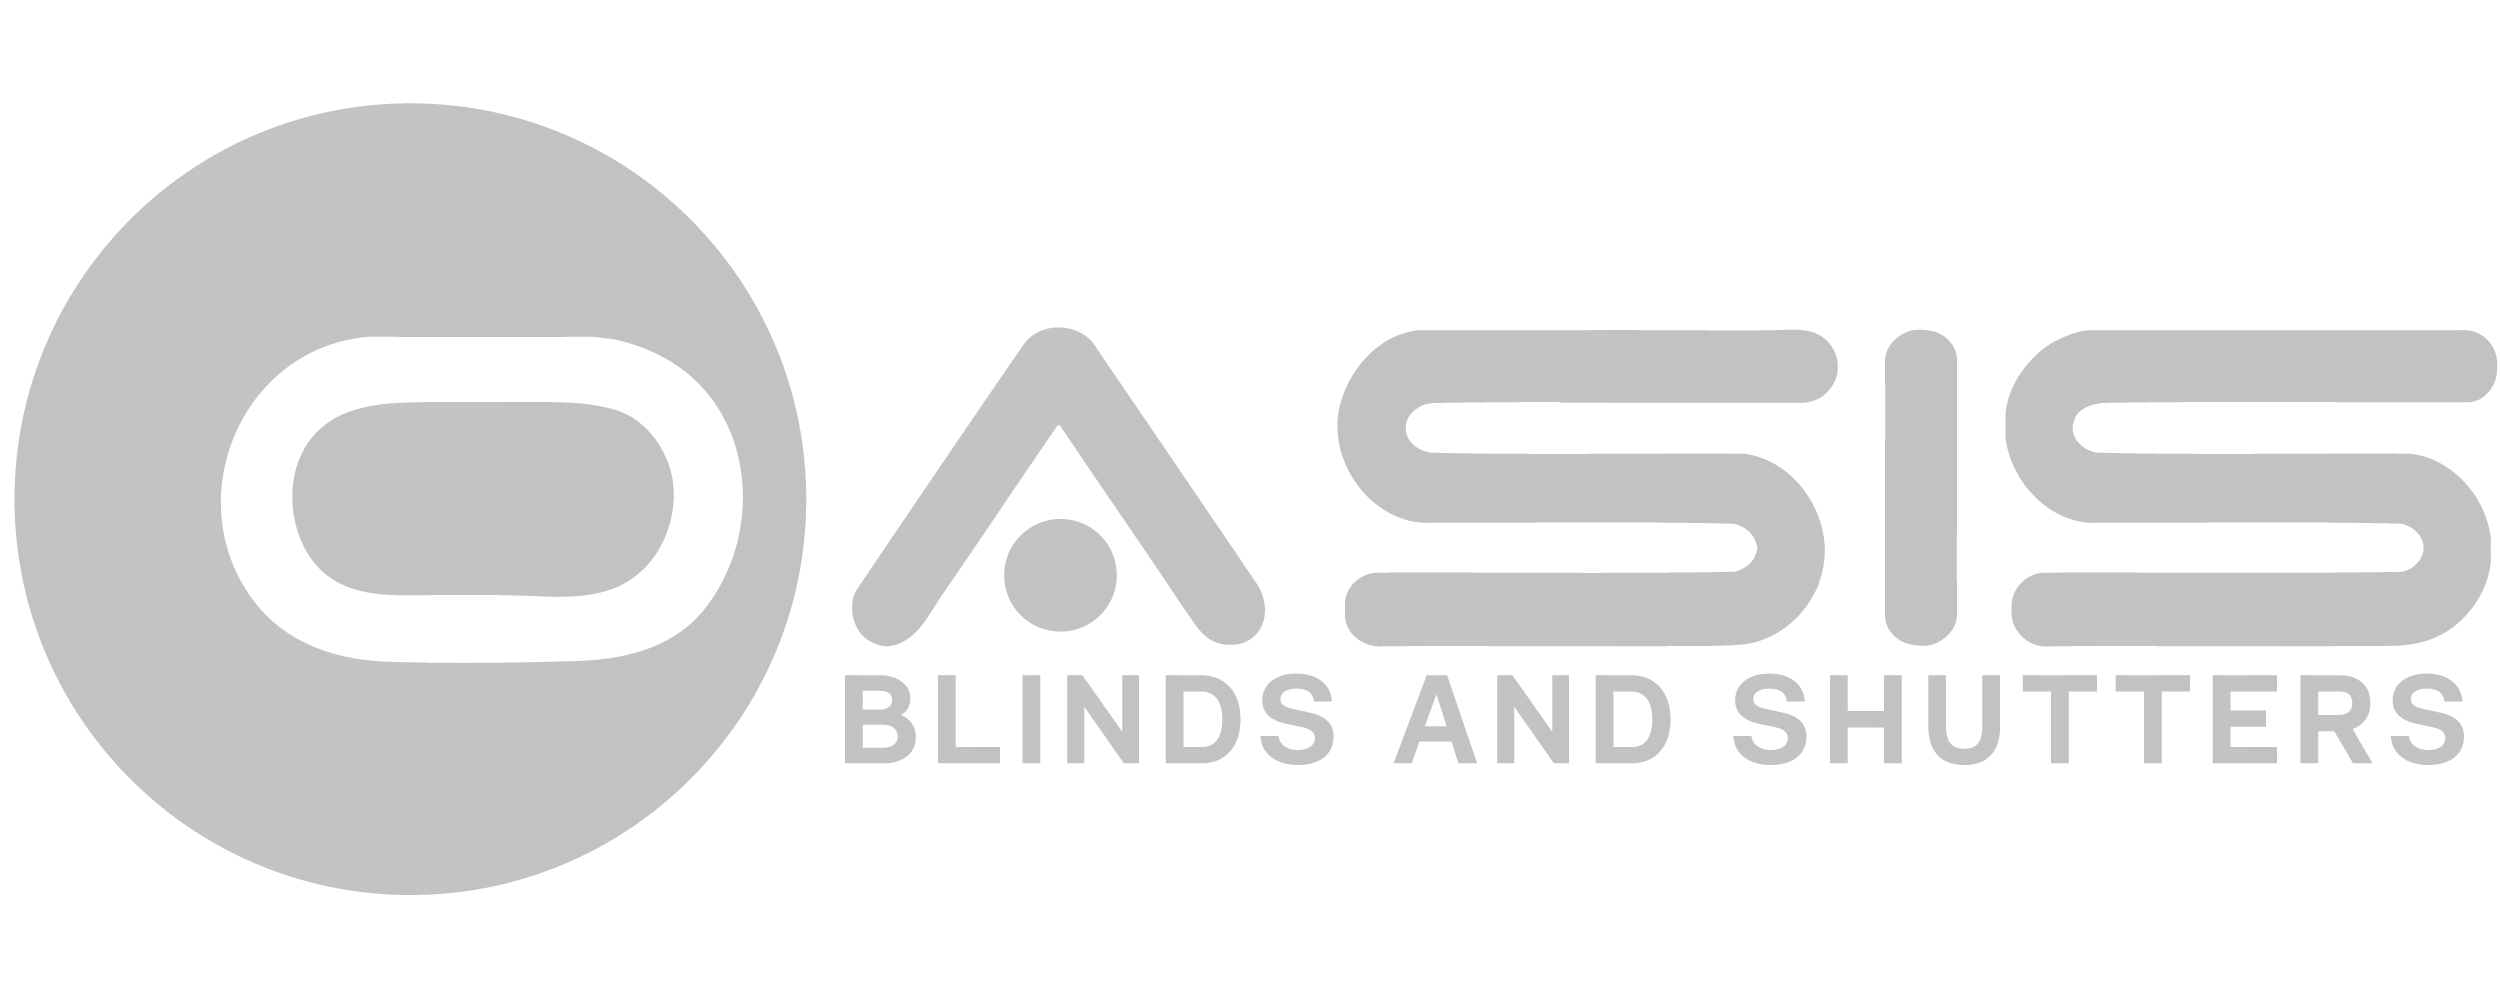 Welcome to Oasis Blinds and Shutters